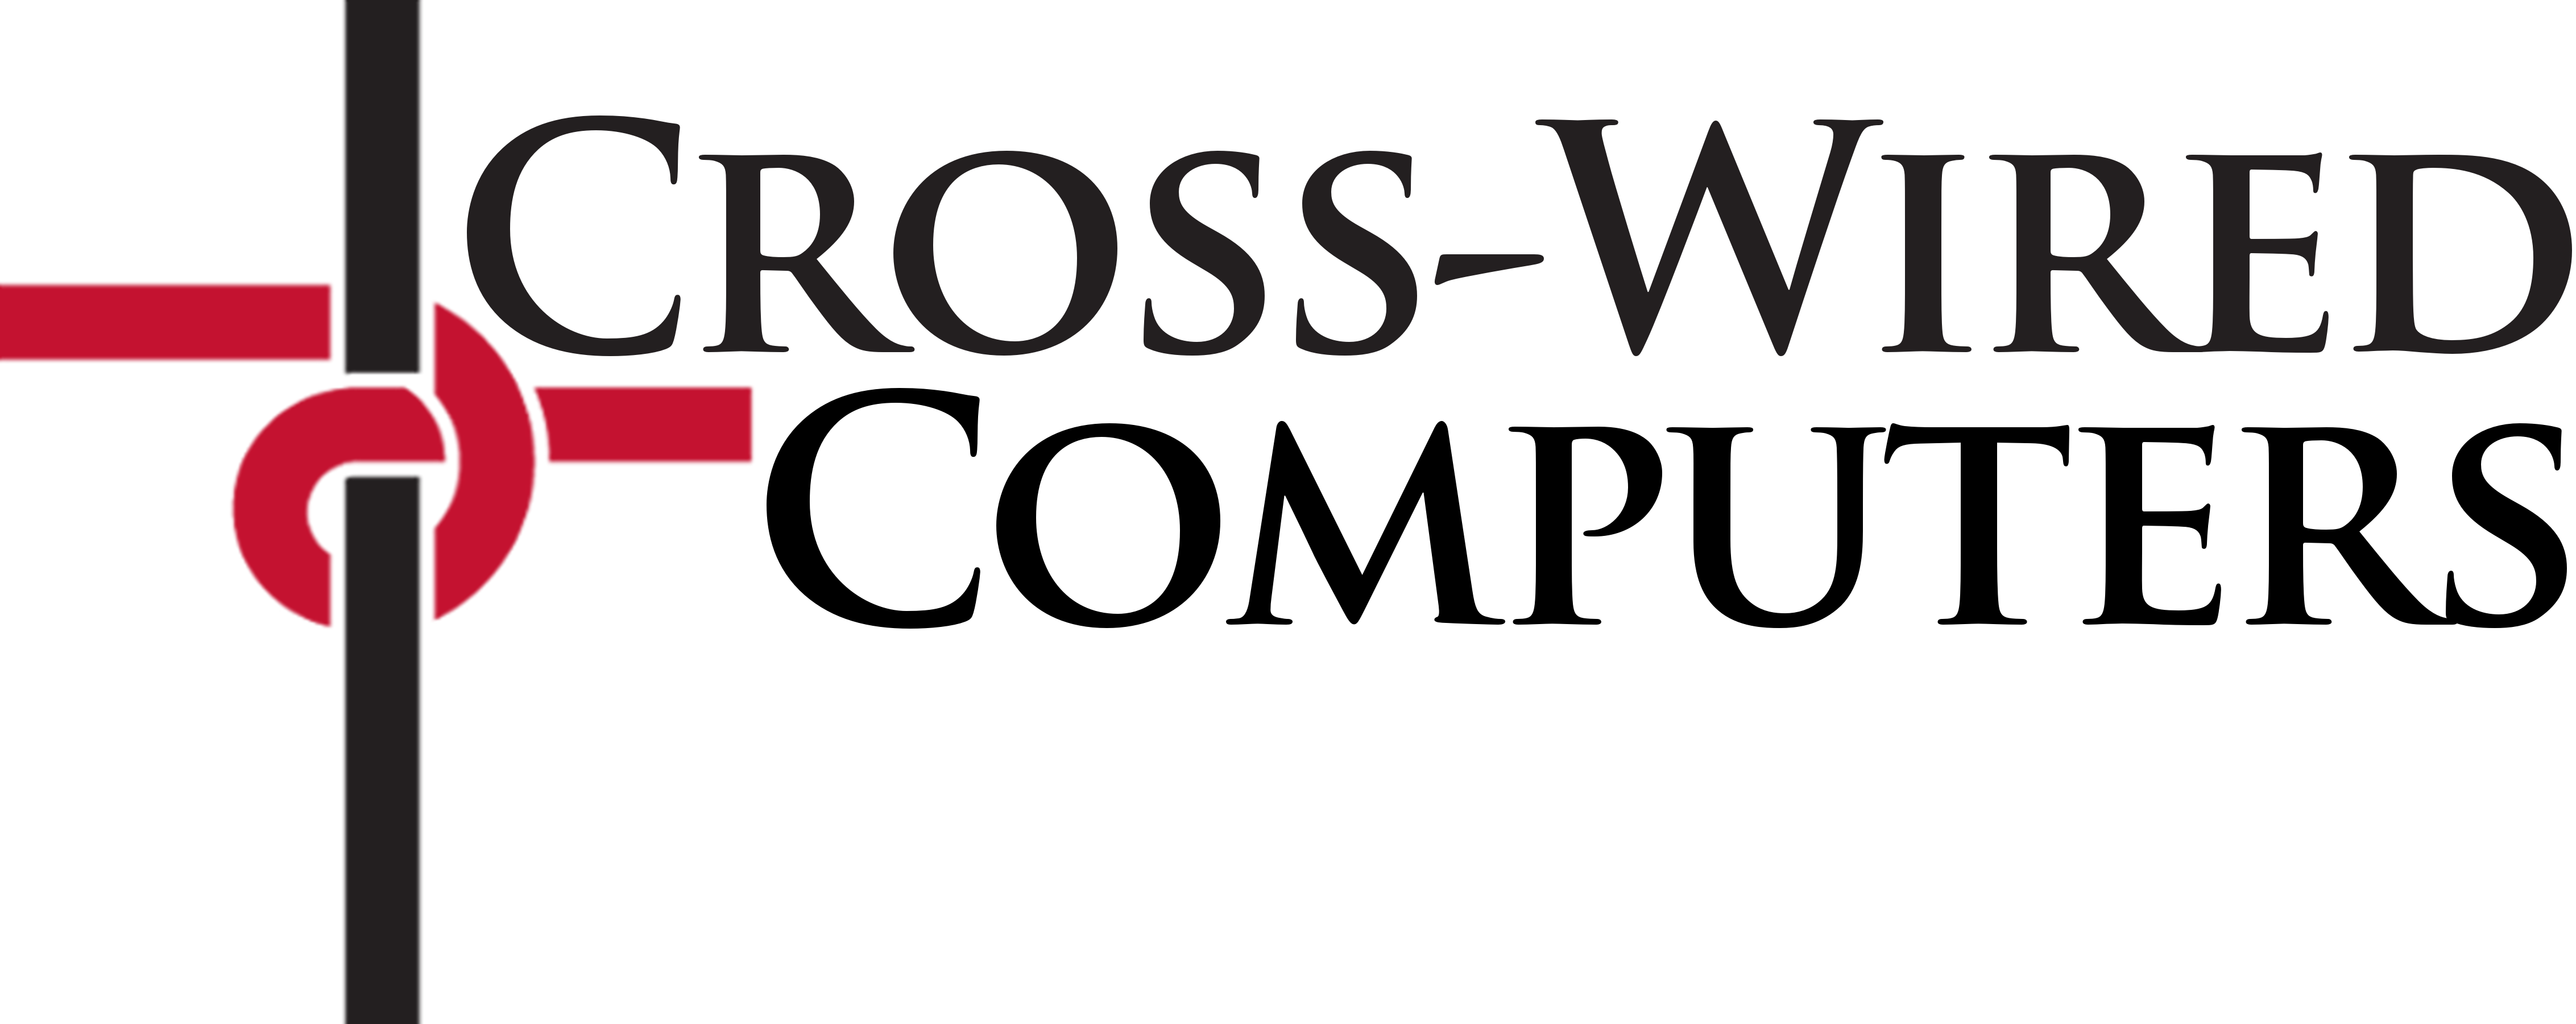 Cross-Wired Computers Logo